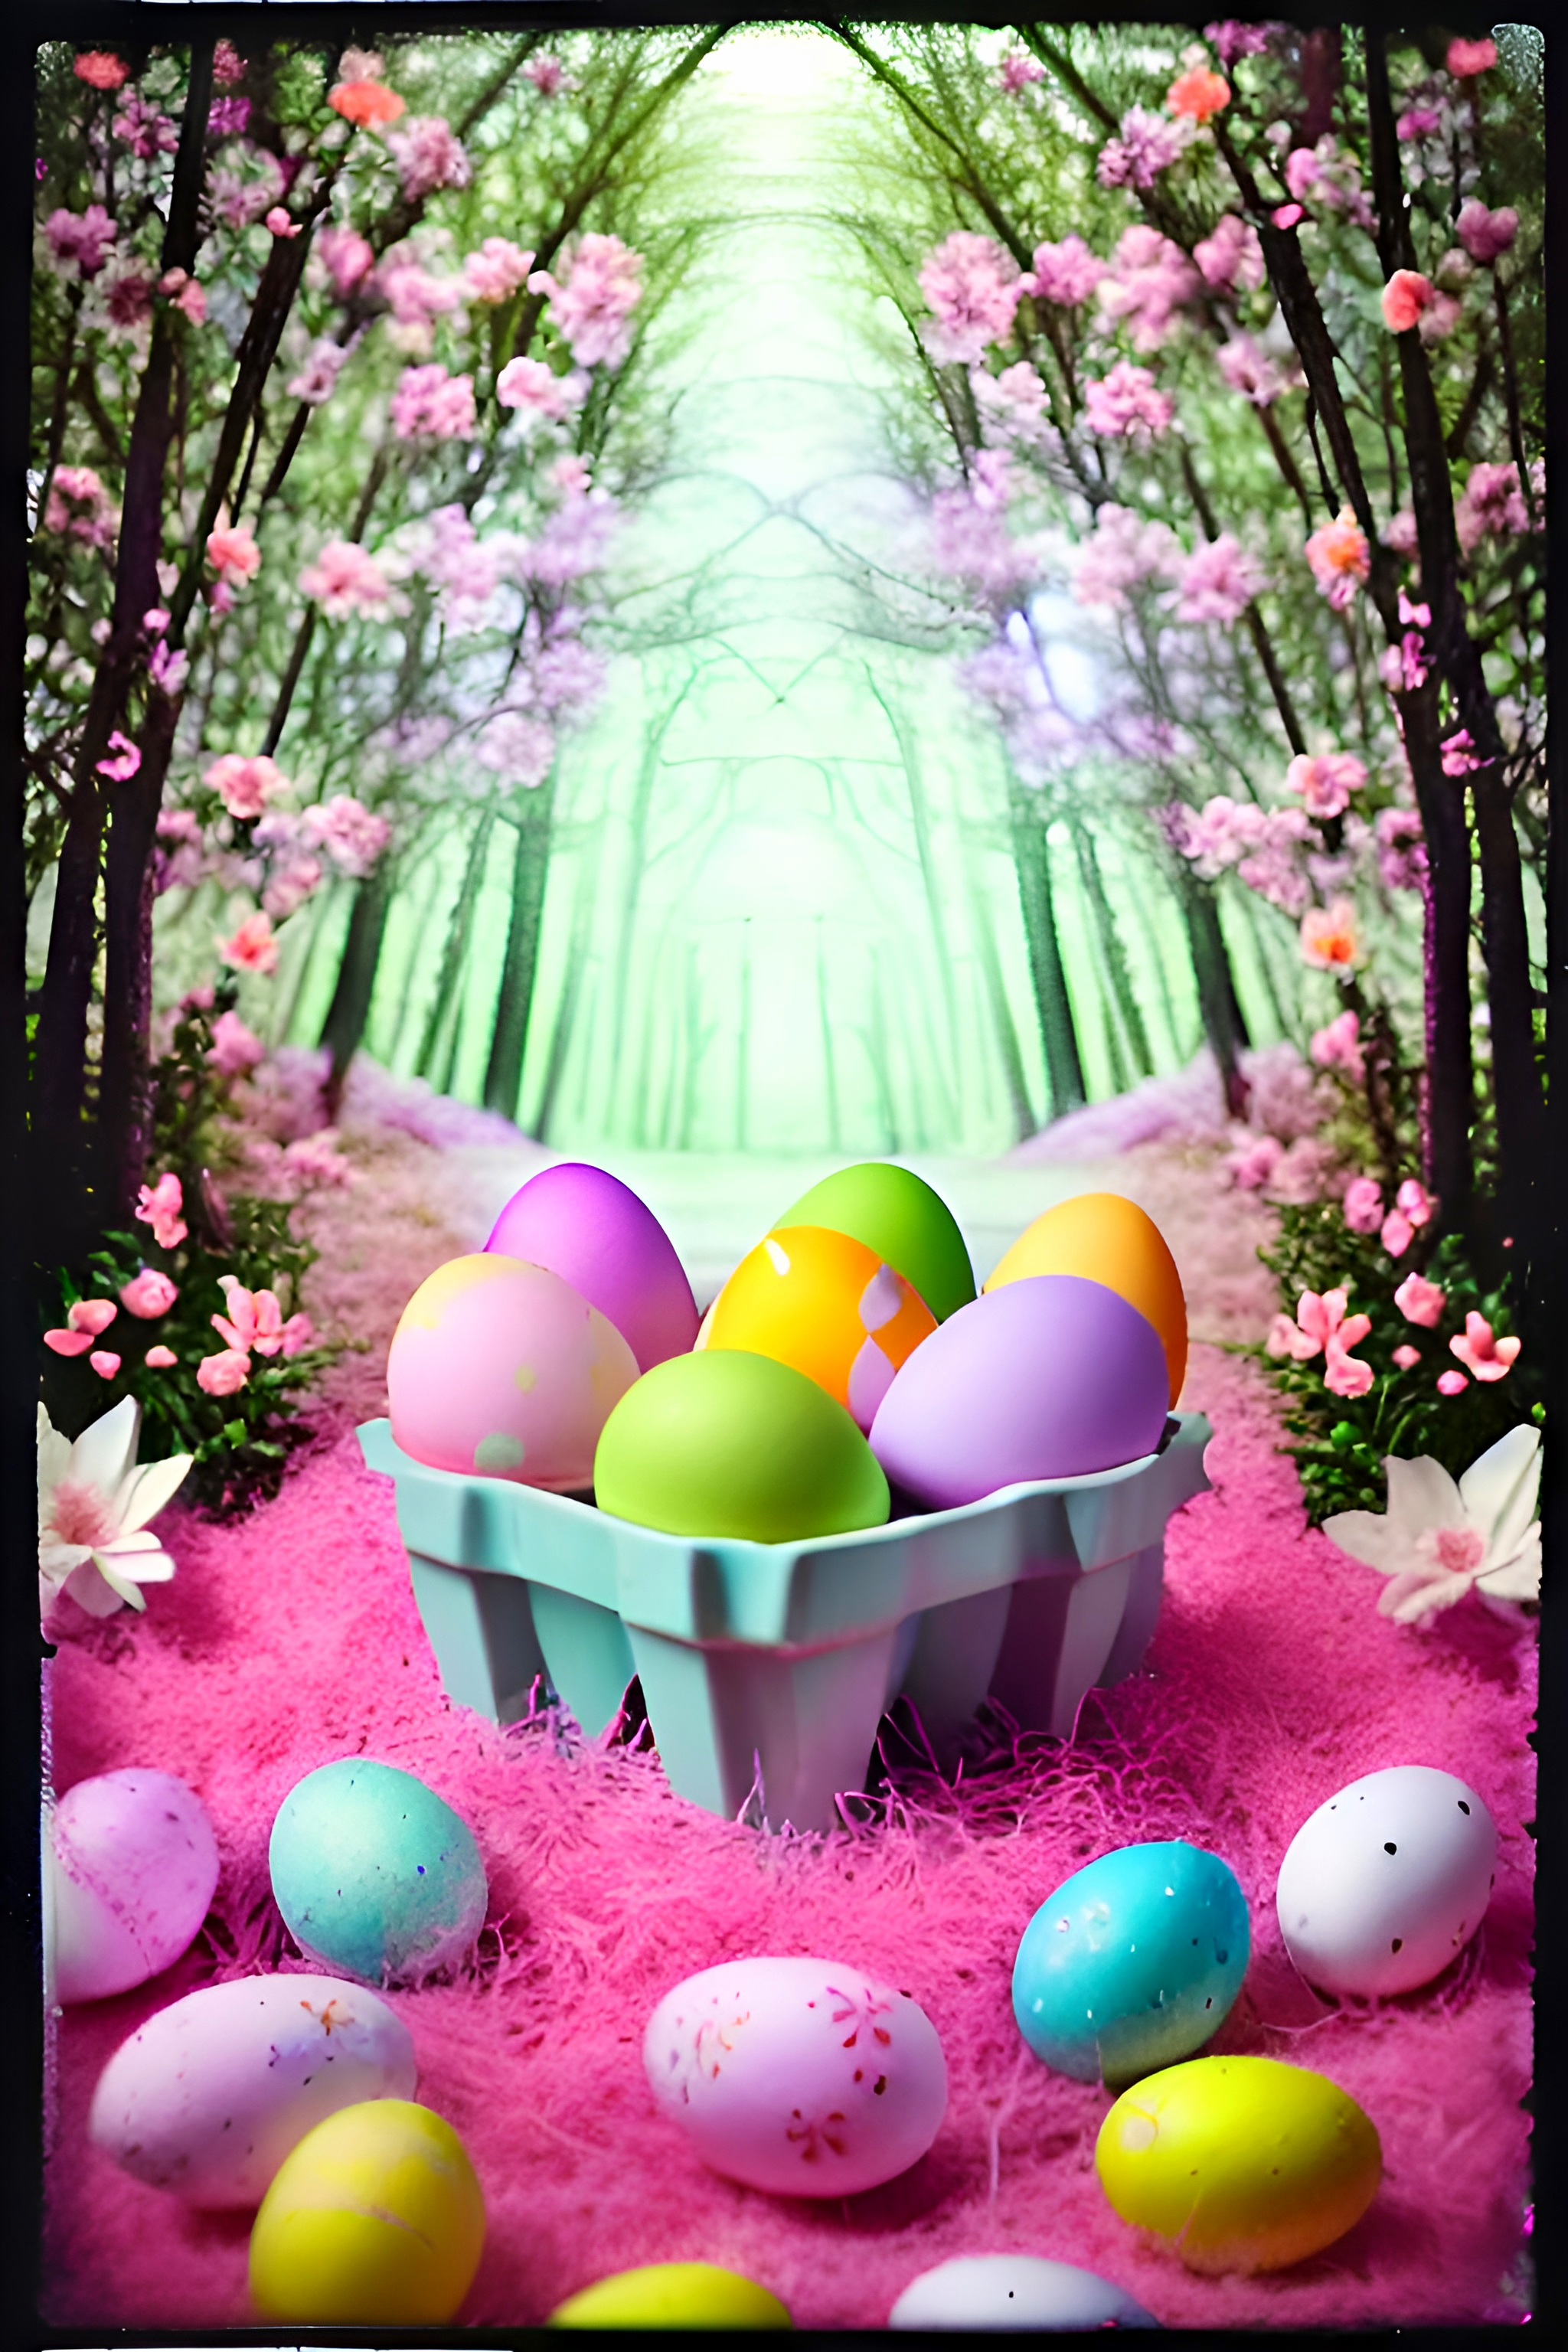 Joys of Easter collection image